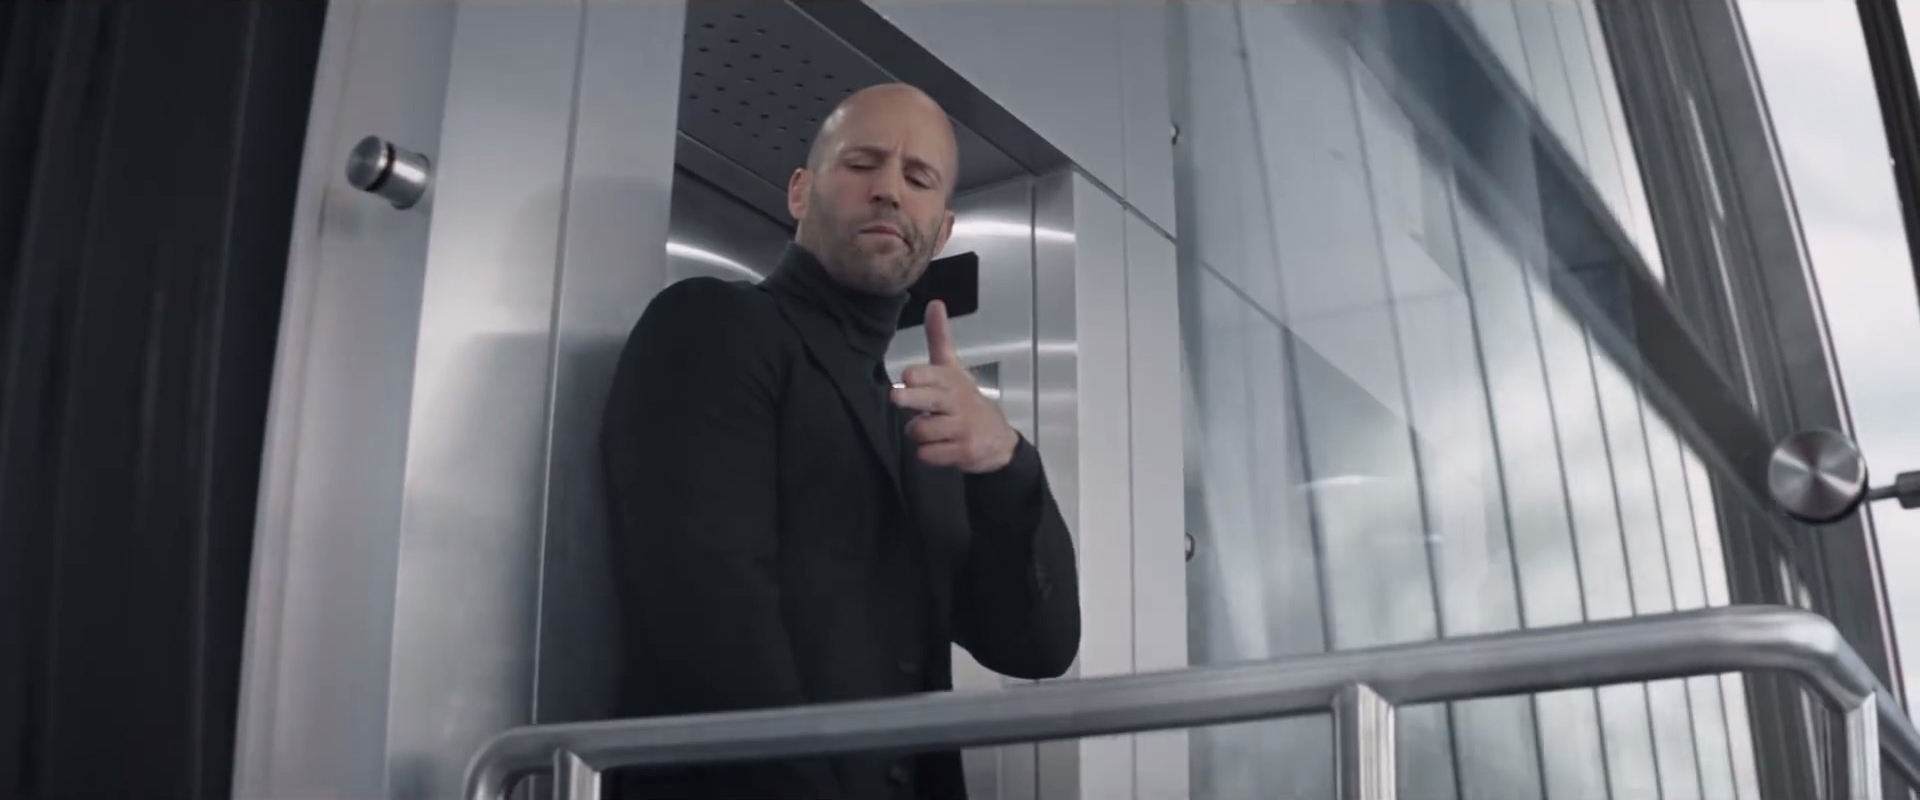 Hobbs & Shaw trailer - The Fast & Furious spinoff is finally here